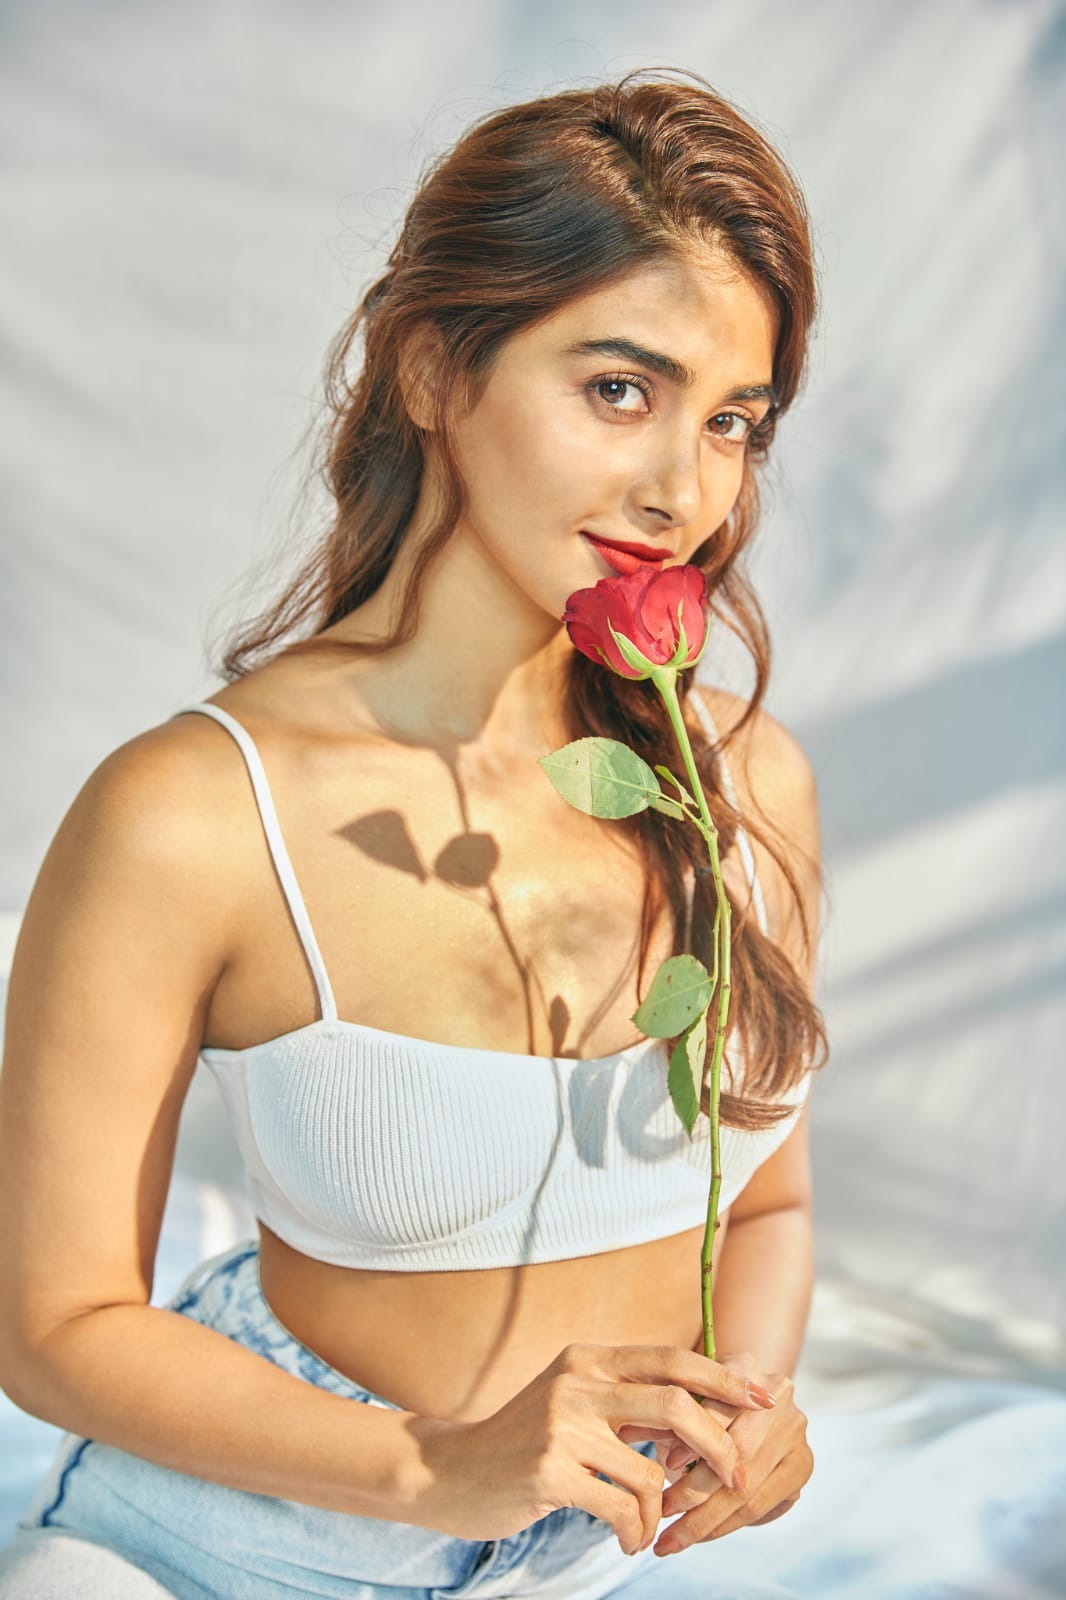 A star performer emerges: Dussehra blockbuster ‘Most Eligible Bachelor’ brings a new Pooja Hegde